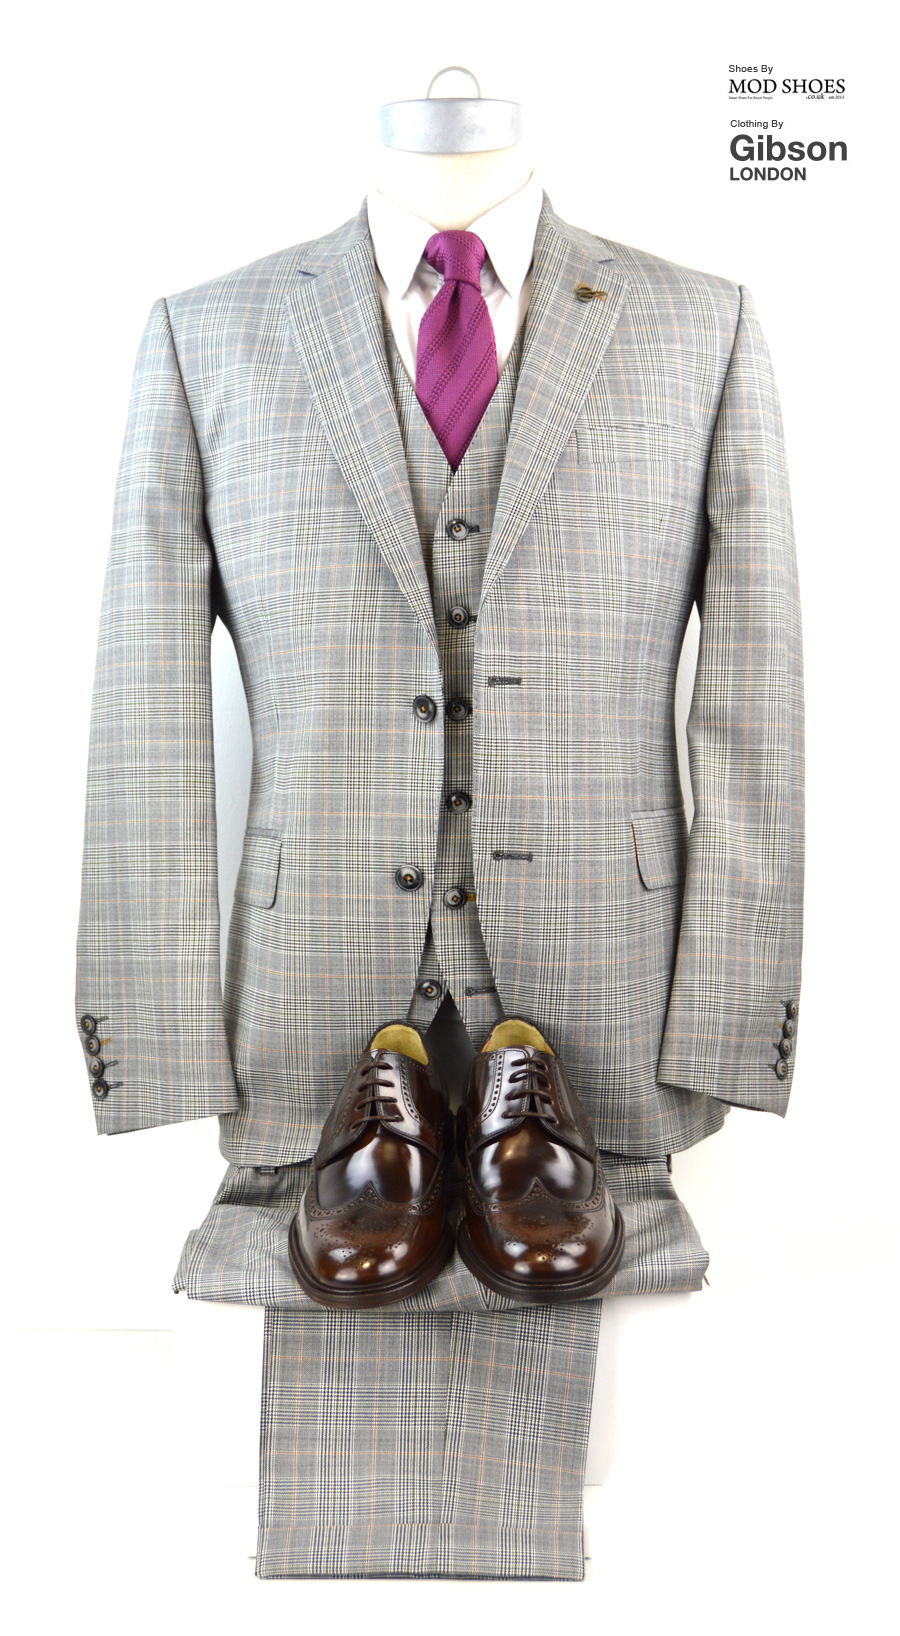 modshoes-bridger-brogues-with-prince-of-wales-suit-from-gibson-clothes